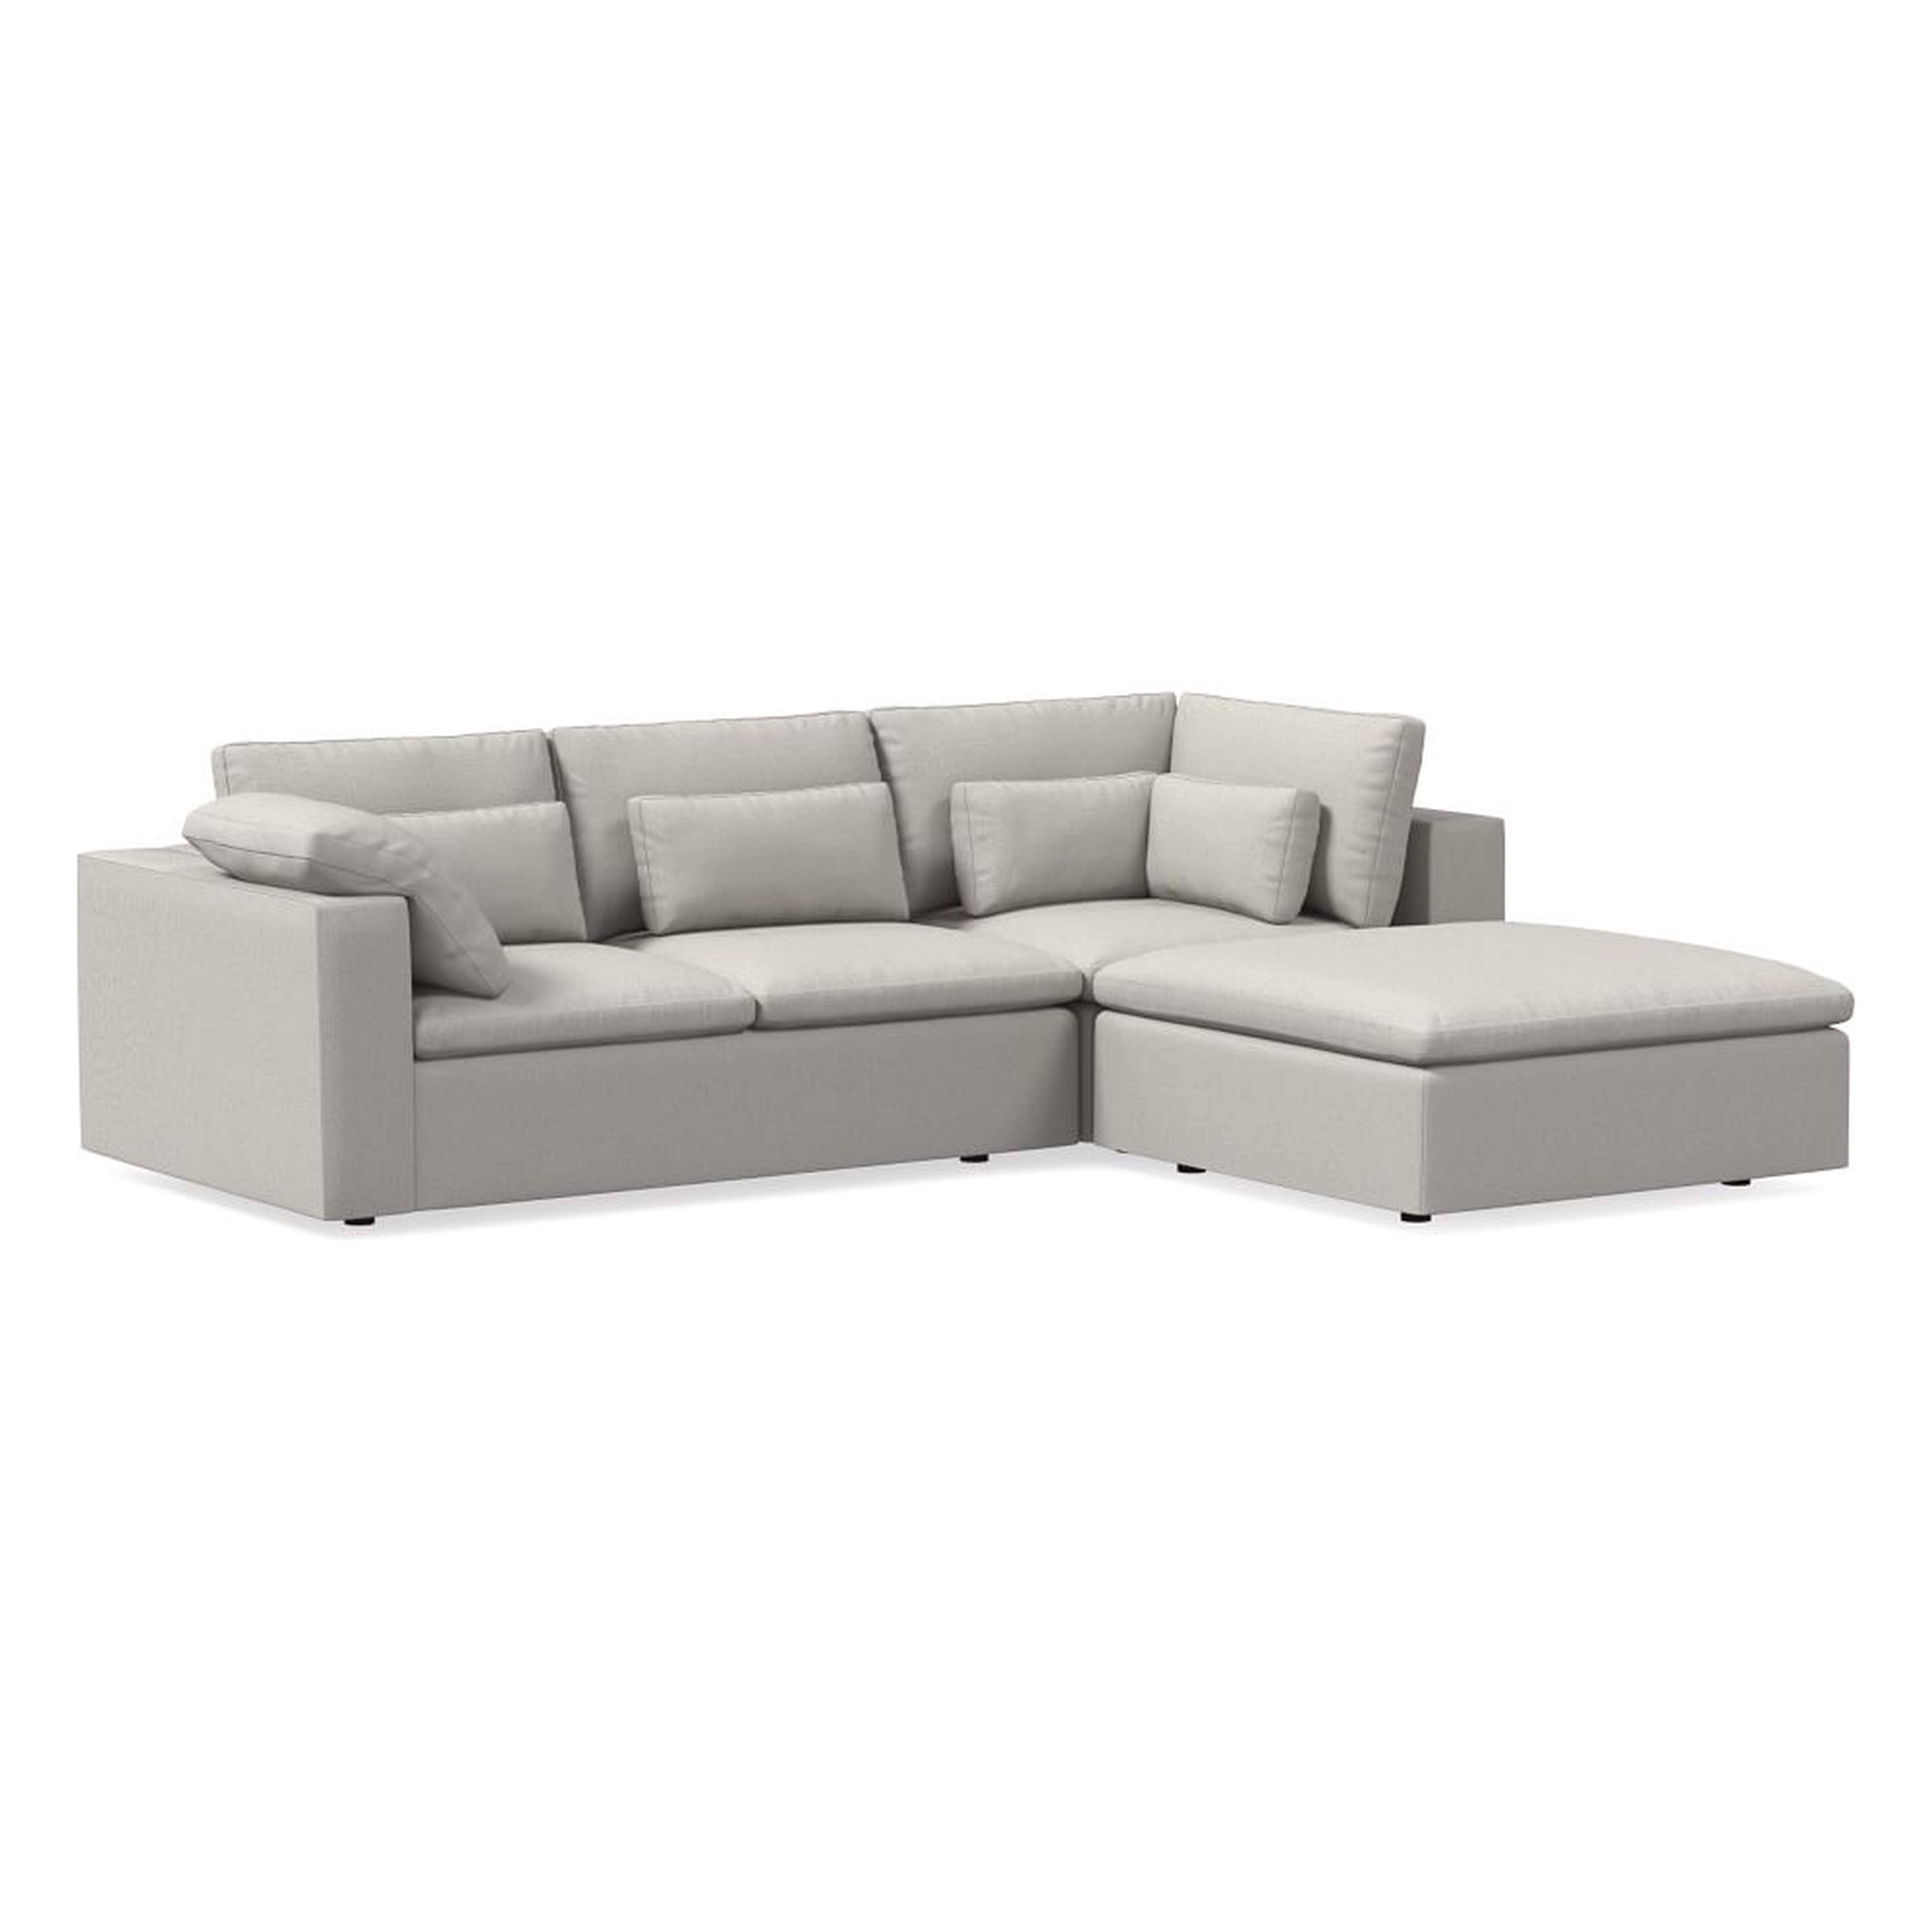 Harmony Mod 122" Right Ottoman Multi-seat 3-Pc Sect Performance Yarn Dyed Linen Weave Frost Gray - West Elm